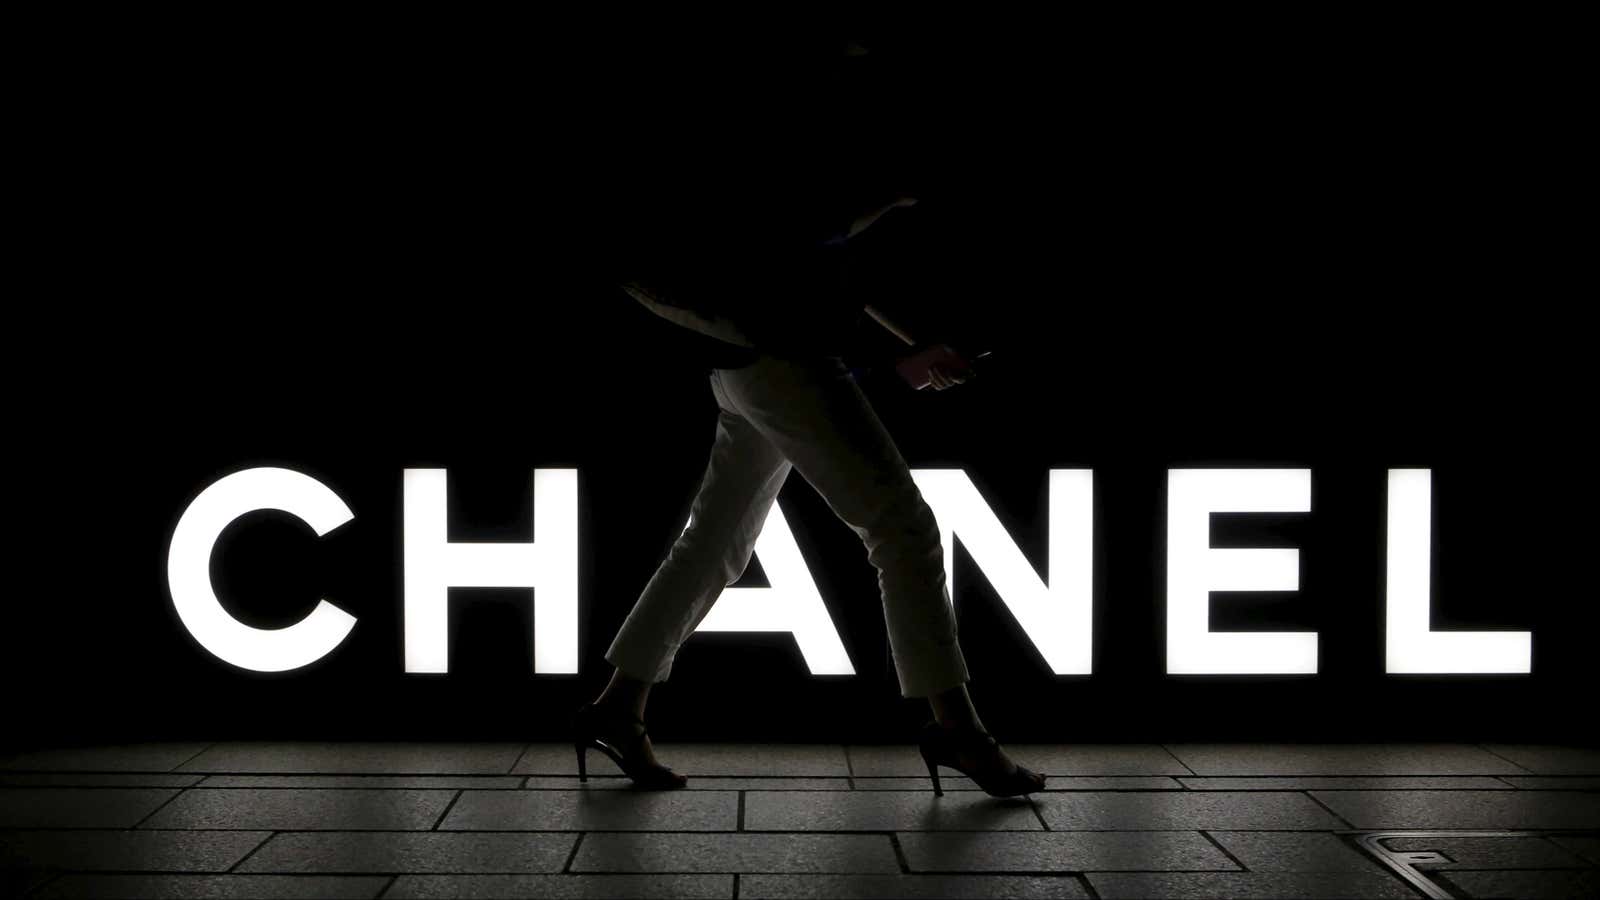 Buy me some Chanel.